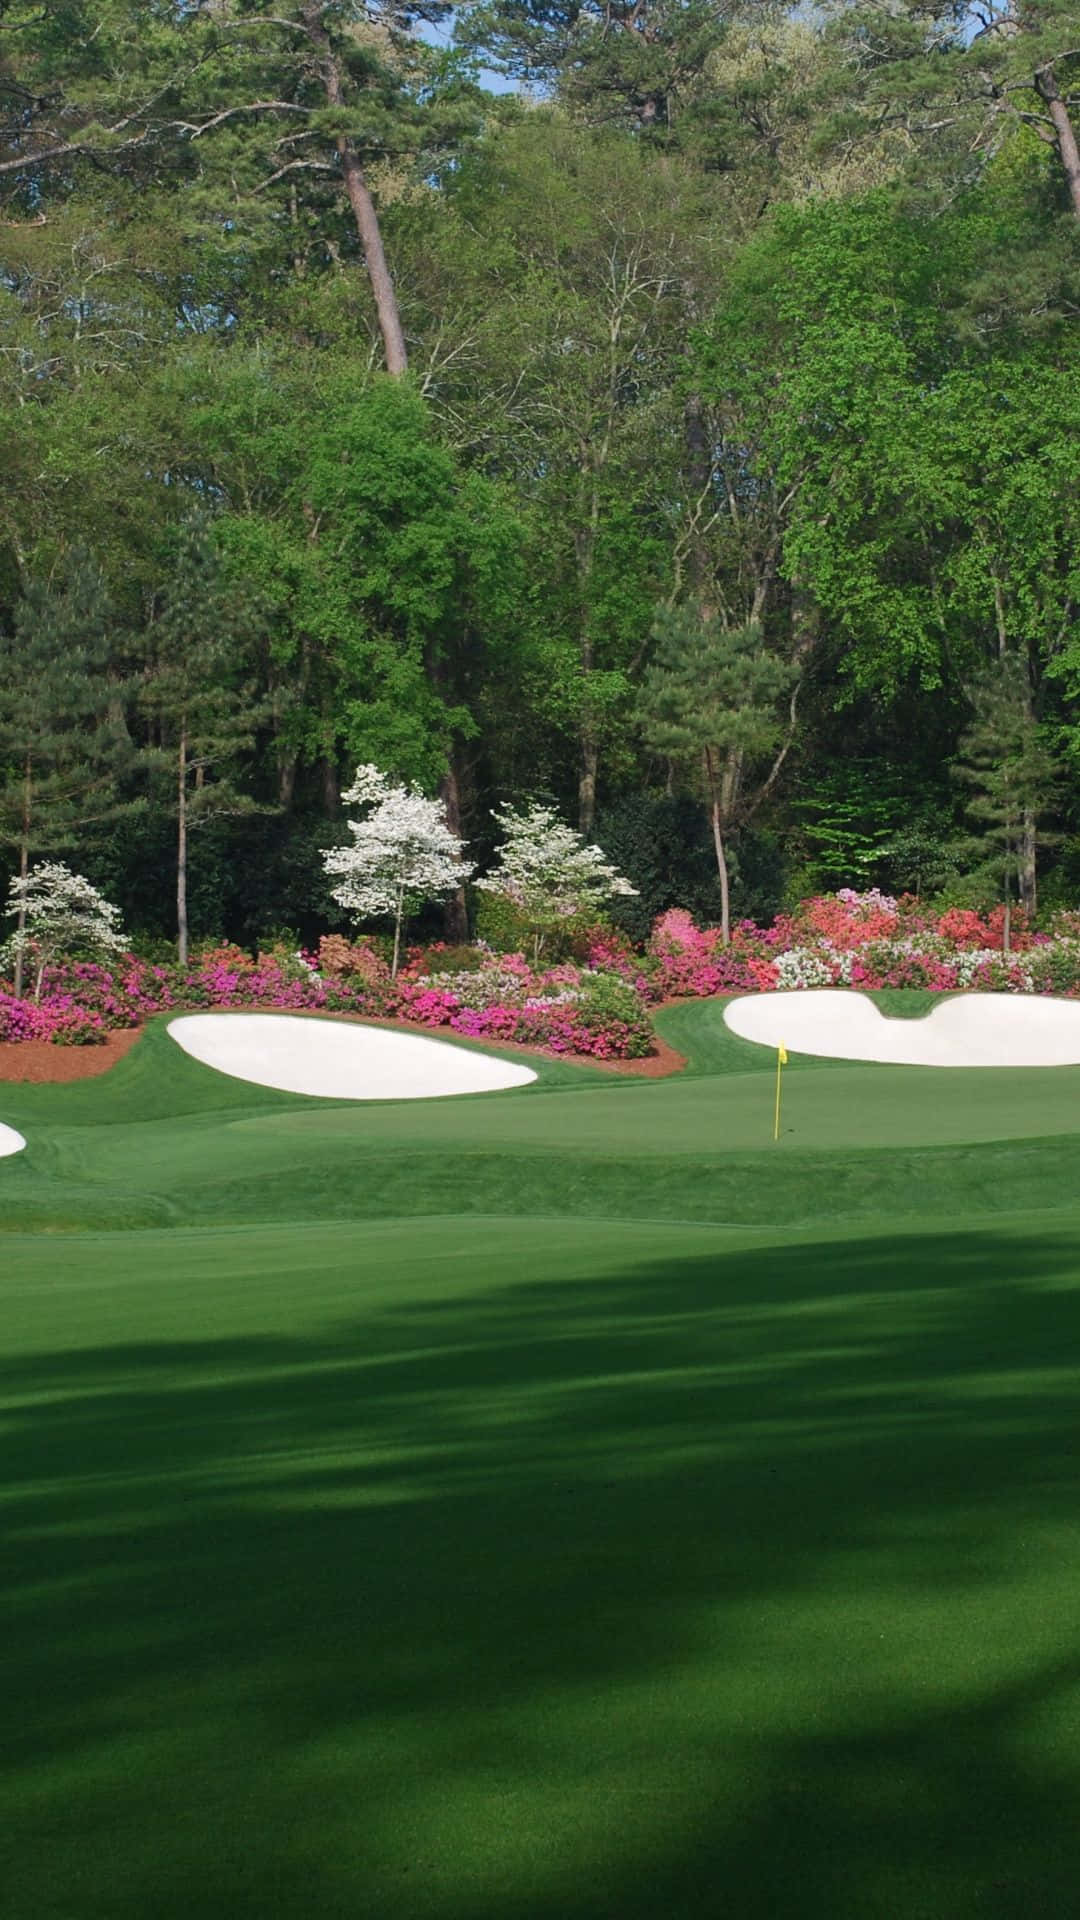 Pink Bushes In Augusta National Iphone Wallpaper